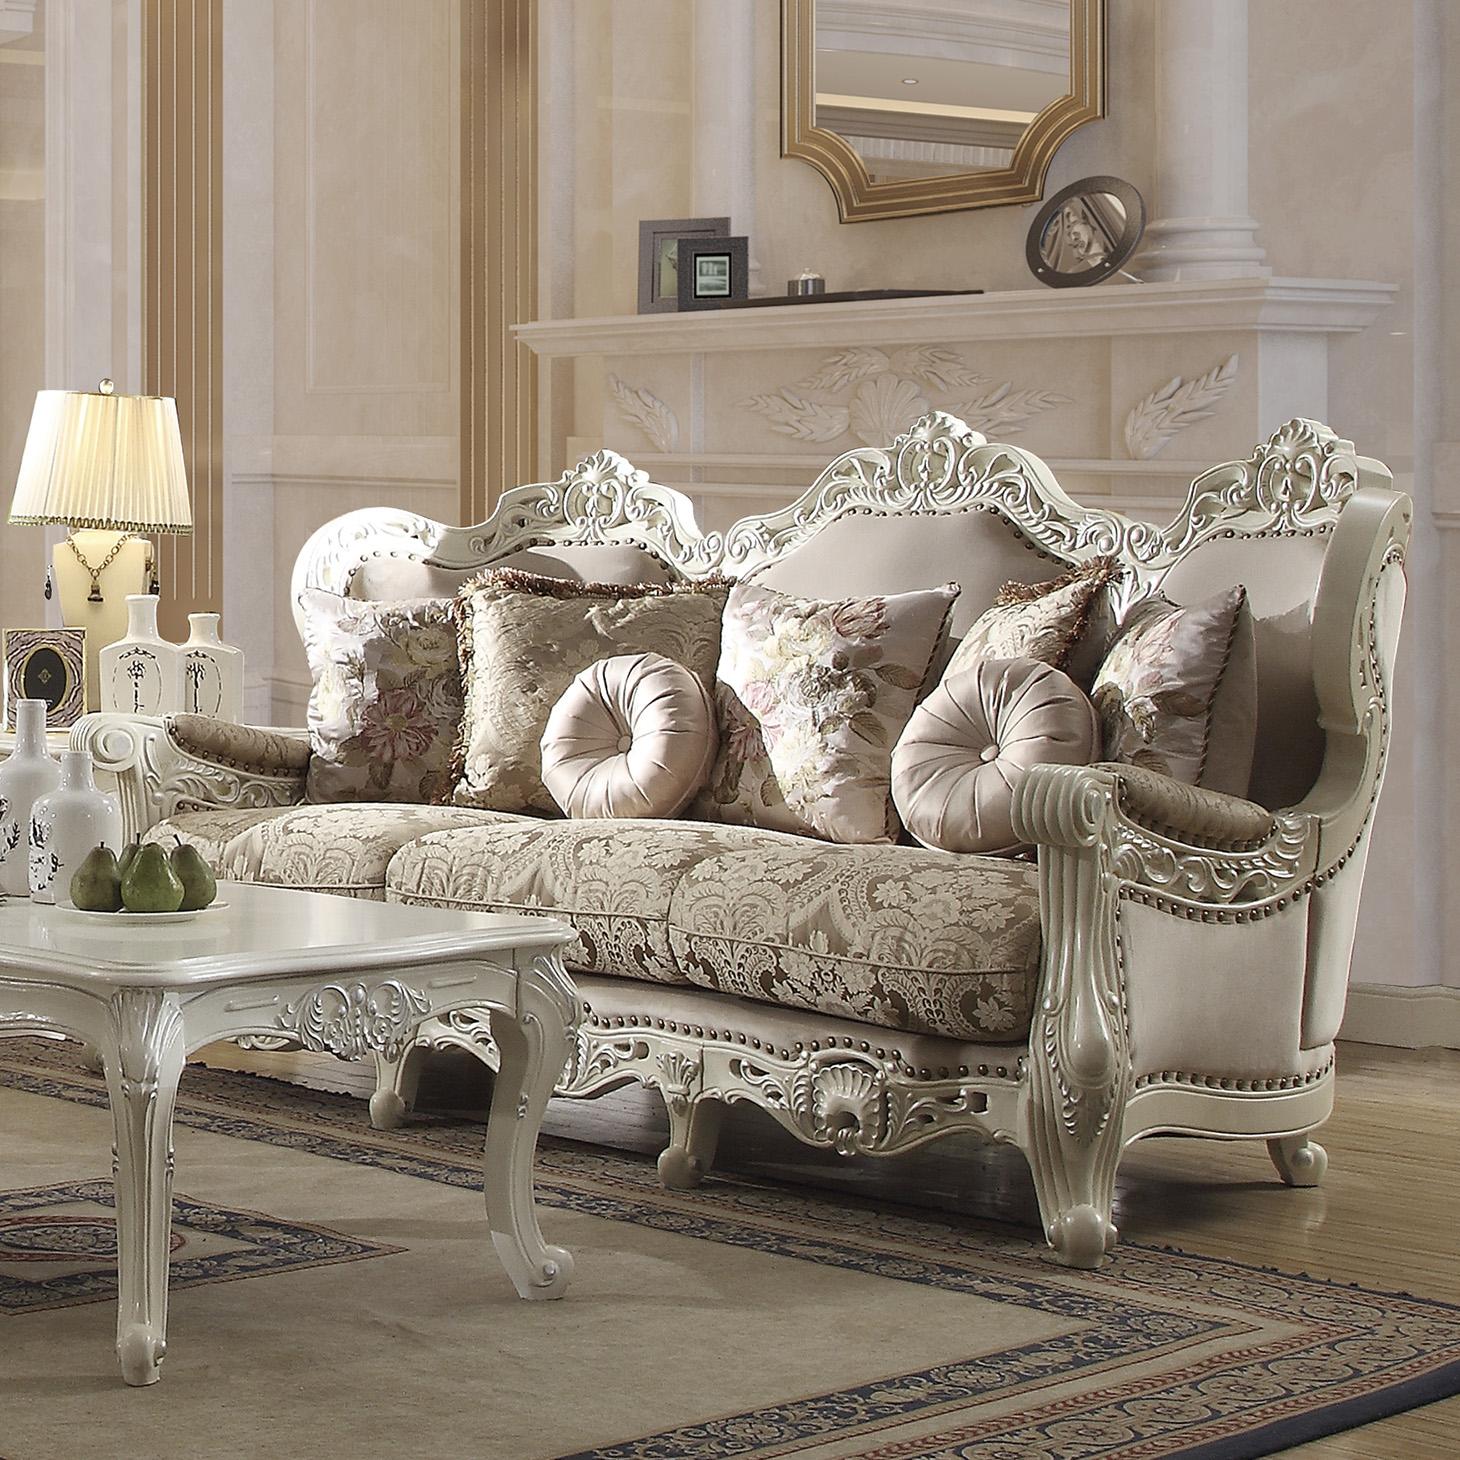 Traditional Sofa HD-2657 HD-S2657 in Ivory, Beige Fabric